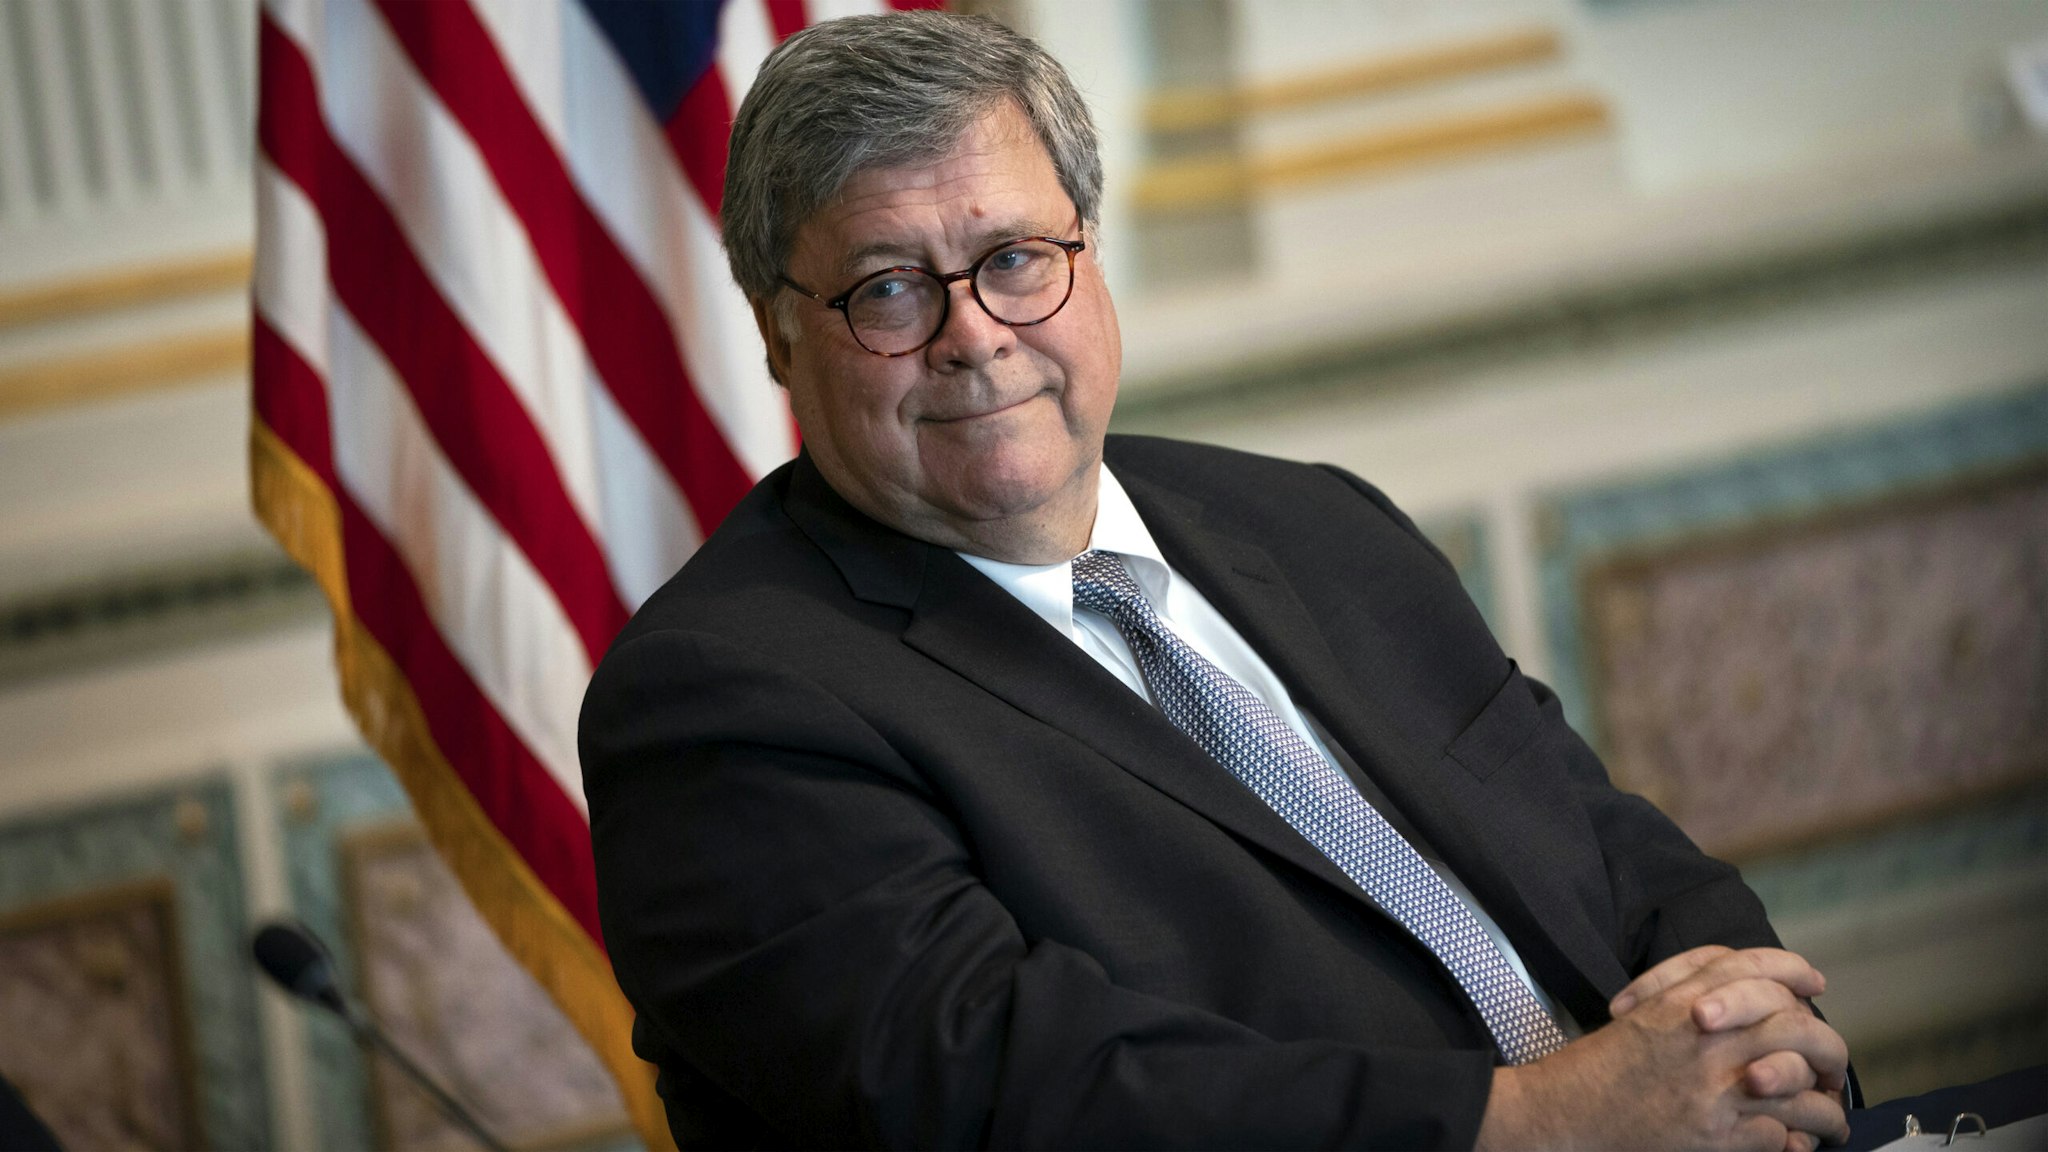 Attorney General William Barr listens during an event to highlight the Department of Justice grants to combat human trafficking, in the Indian Treaty Room of the Eisenhower Executive Office Building on August 4, 2020 in Washington, DC. The Trump administration is issuing more than $35 million in grants to provide safe housing to survivors of human trafficking.